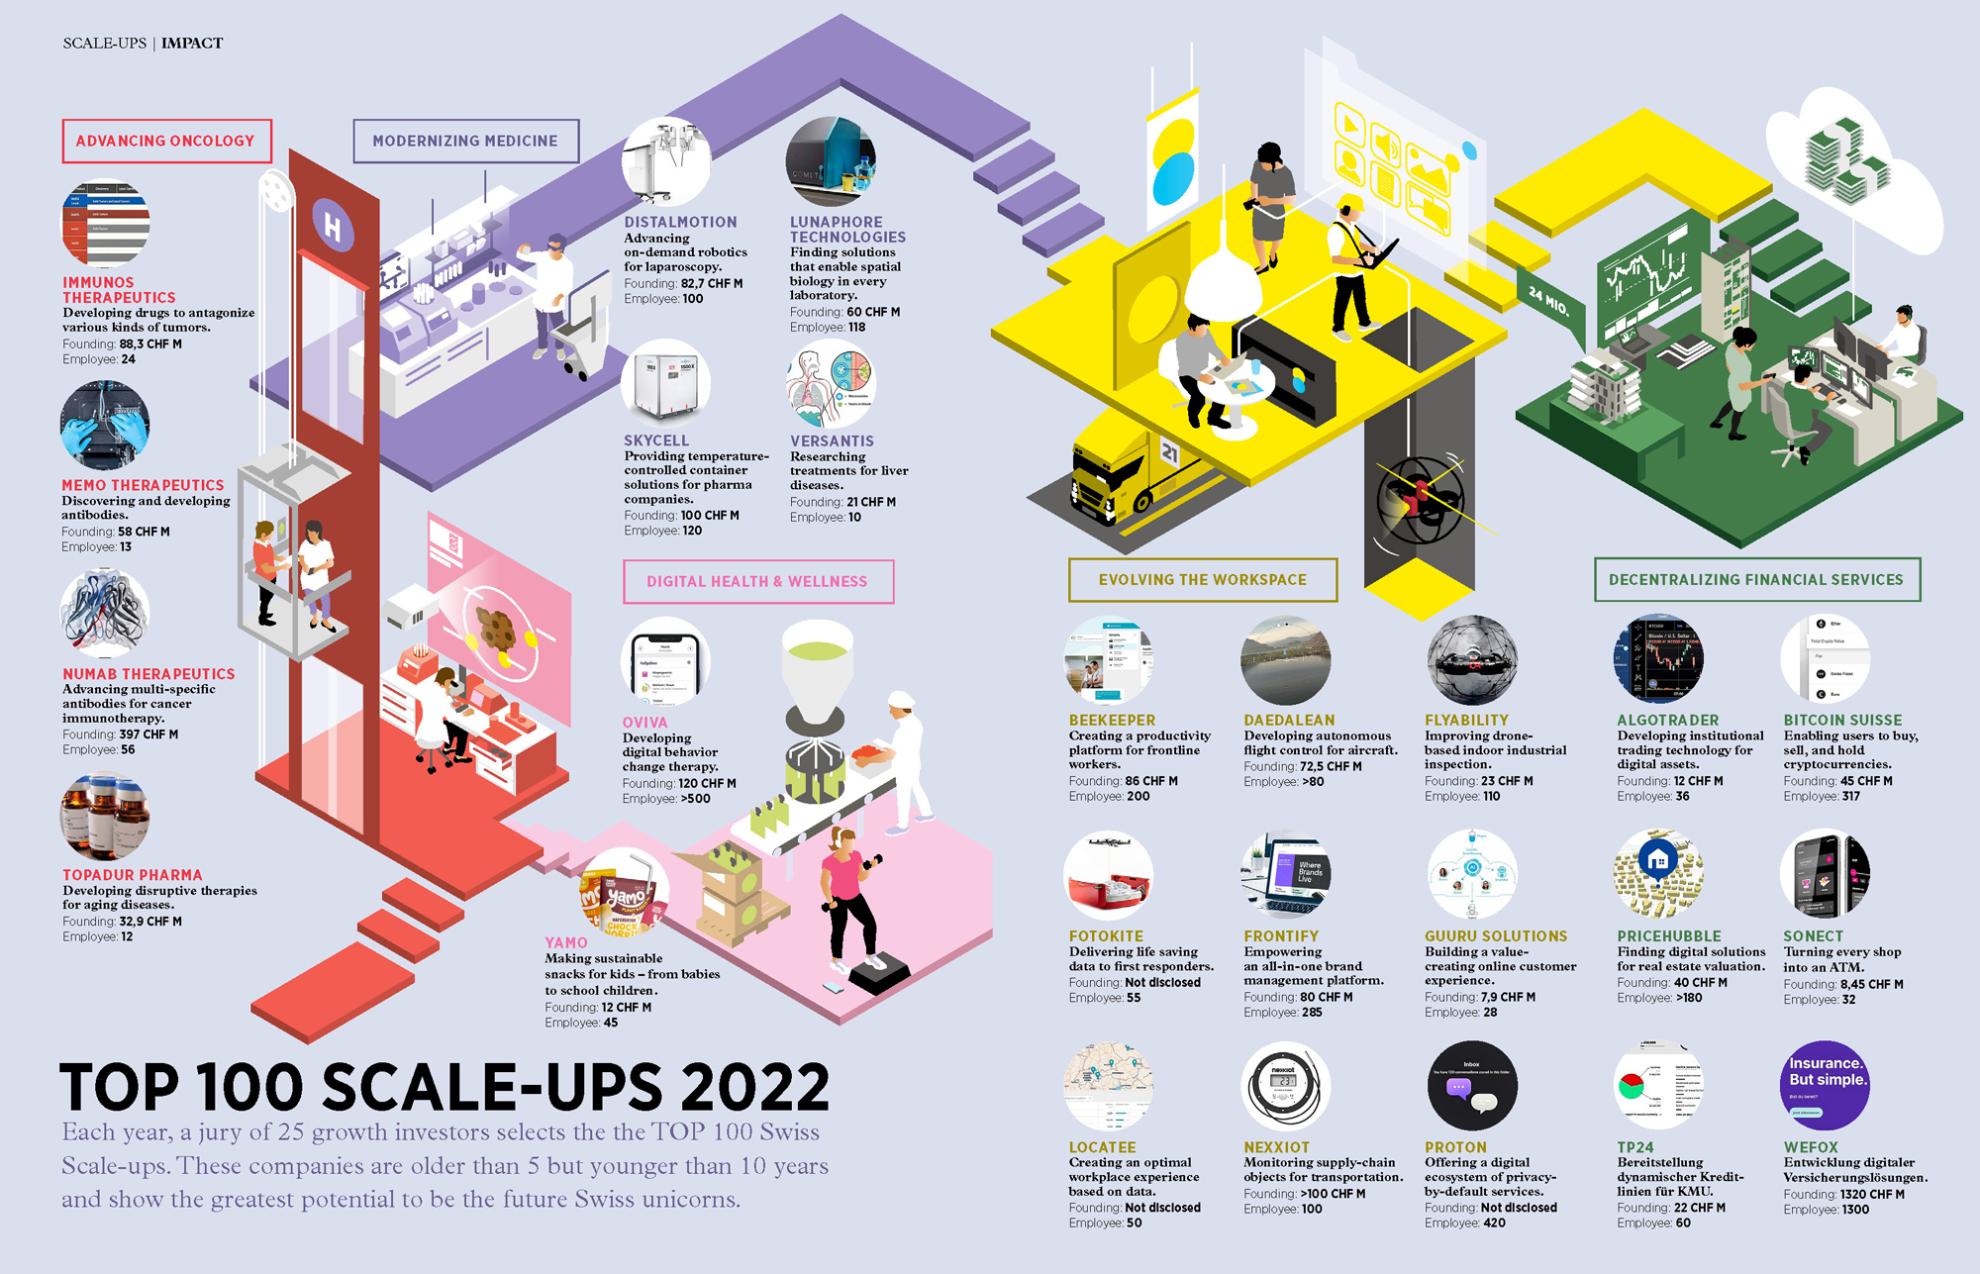 TOP 100 Swiss Startup 2022 scale-up companies